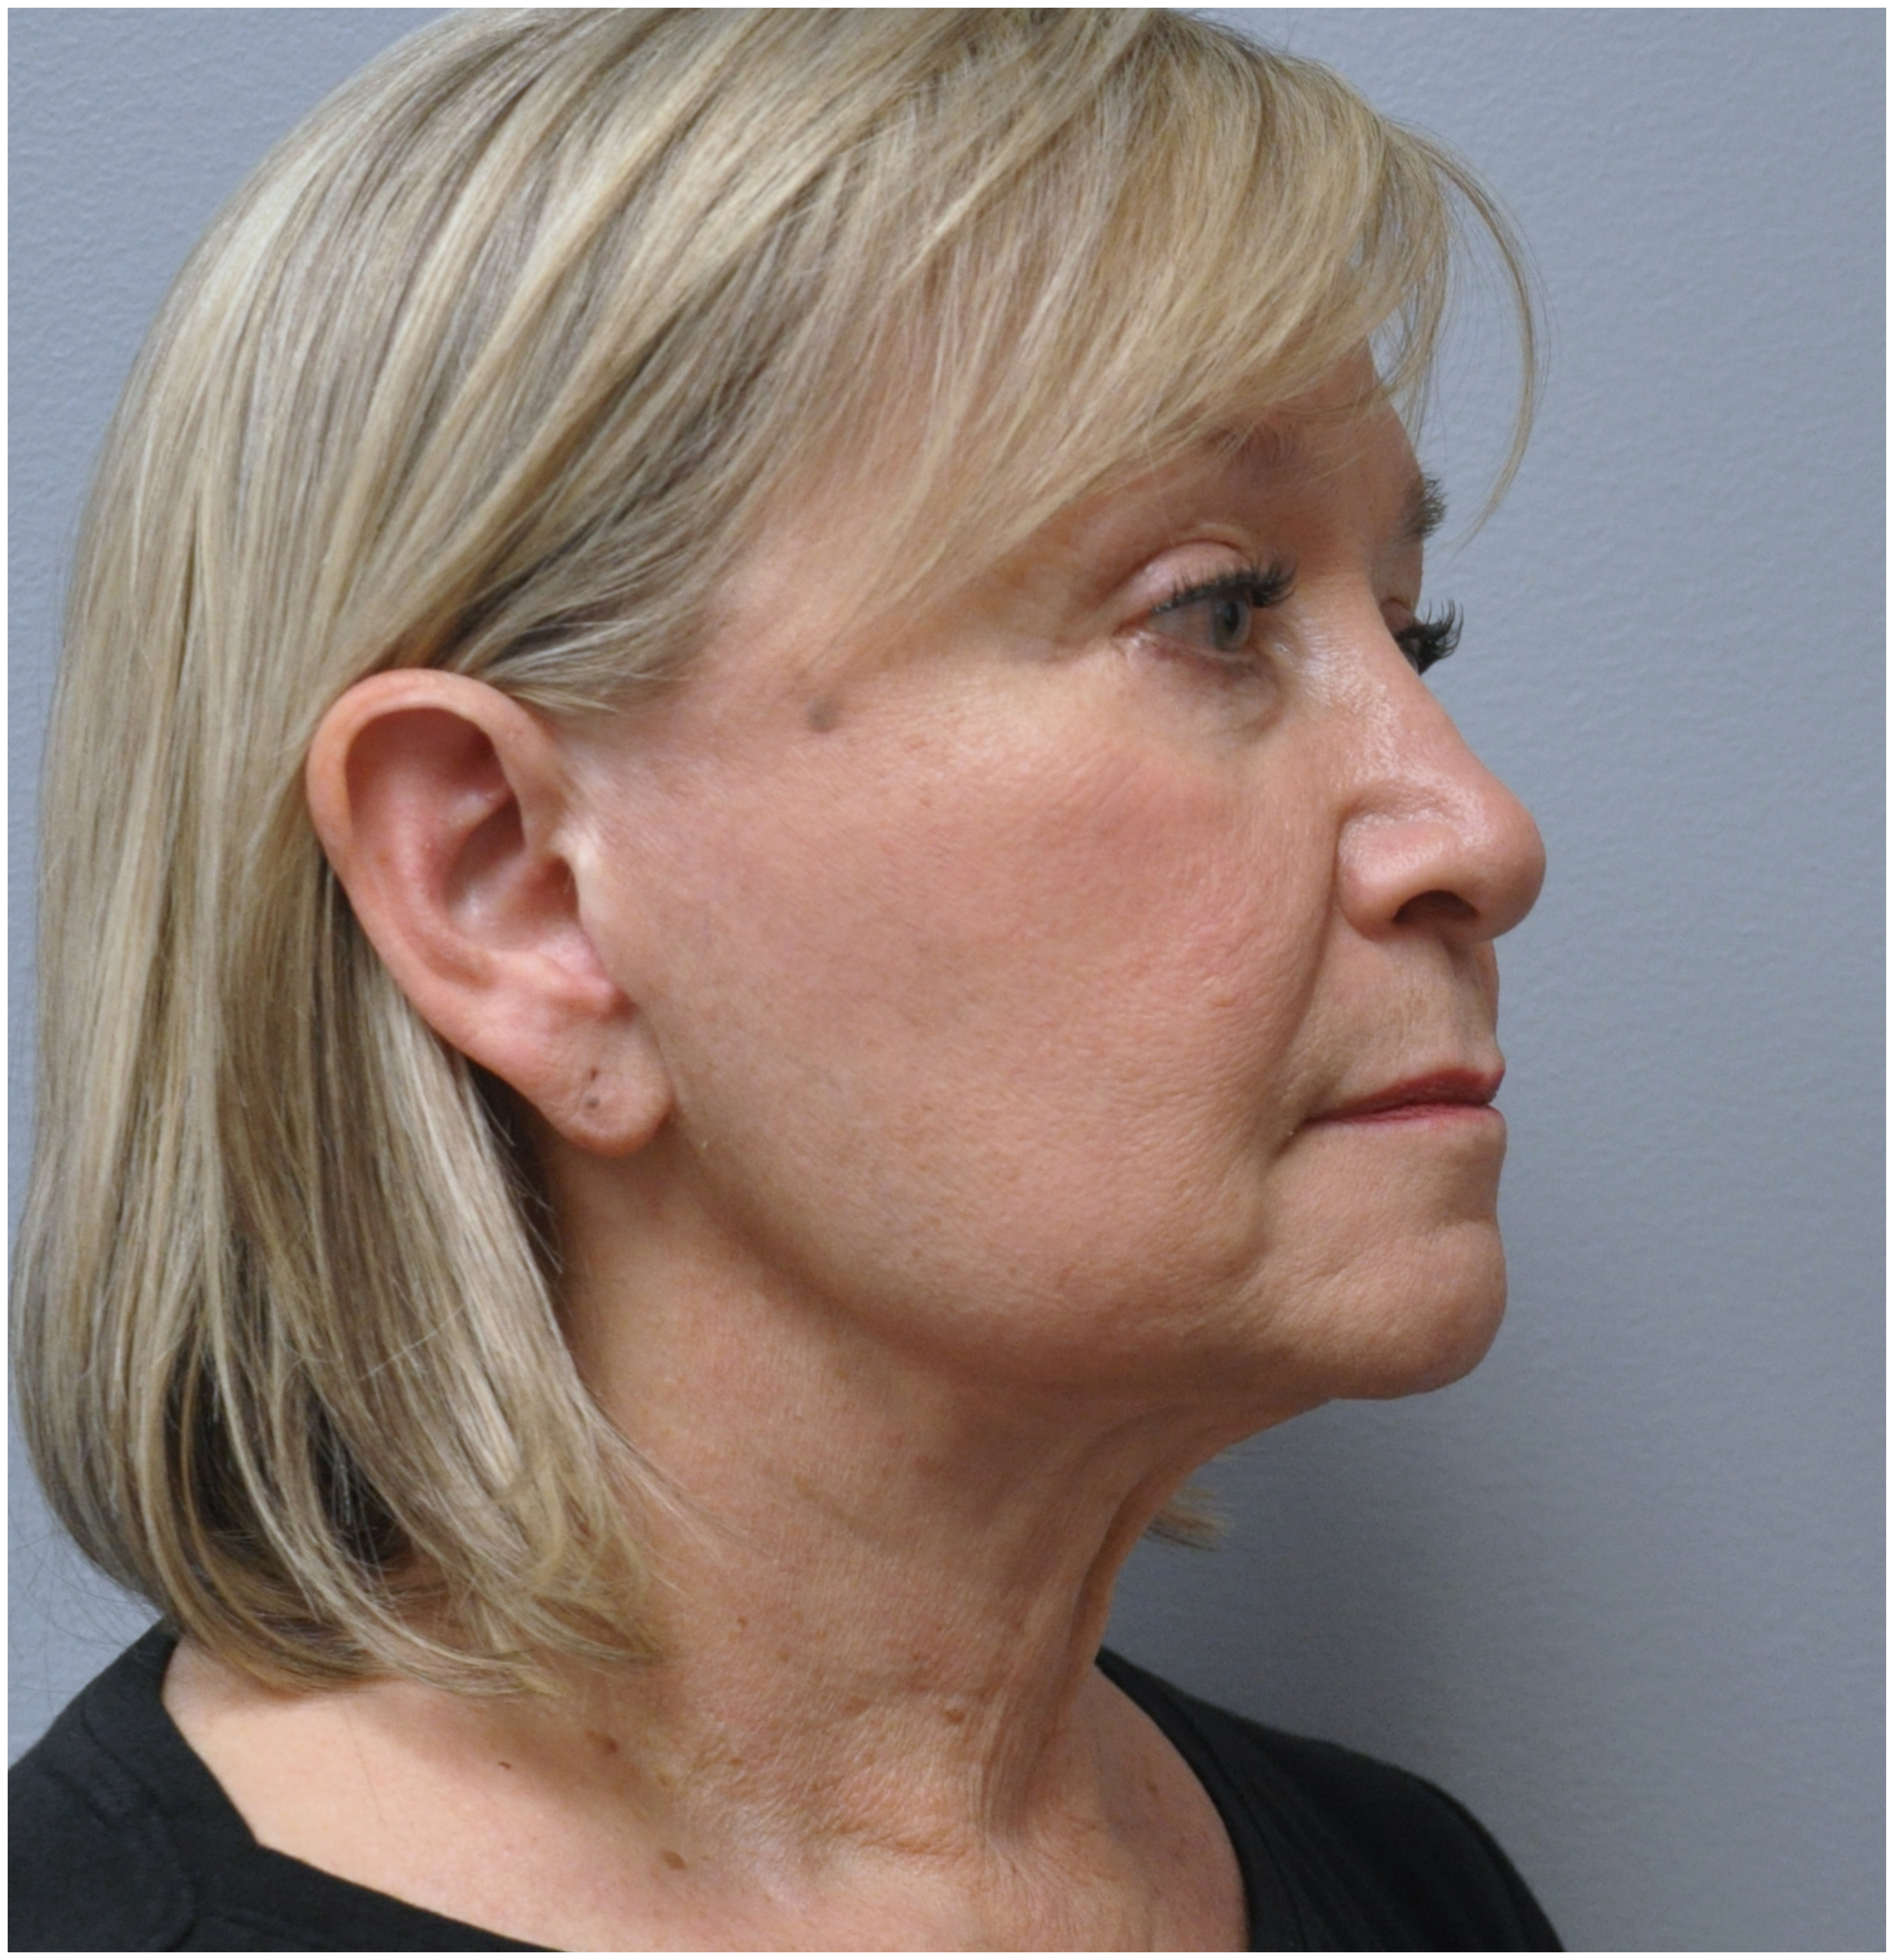 Necklift Before and After | Little Lipo